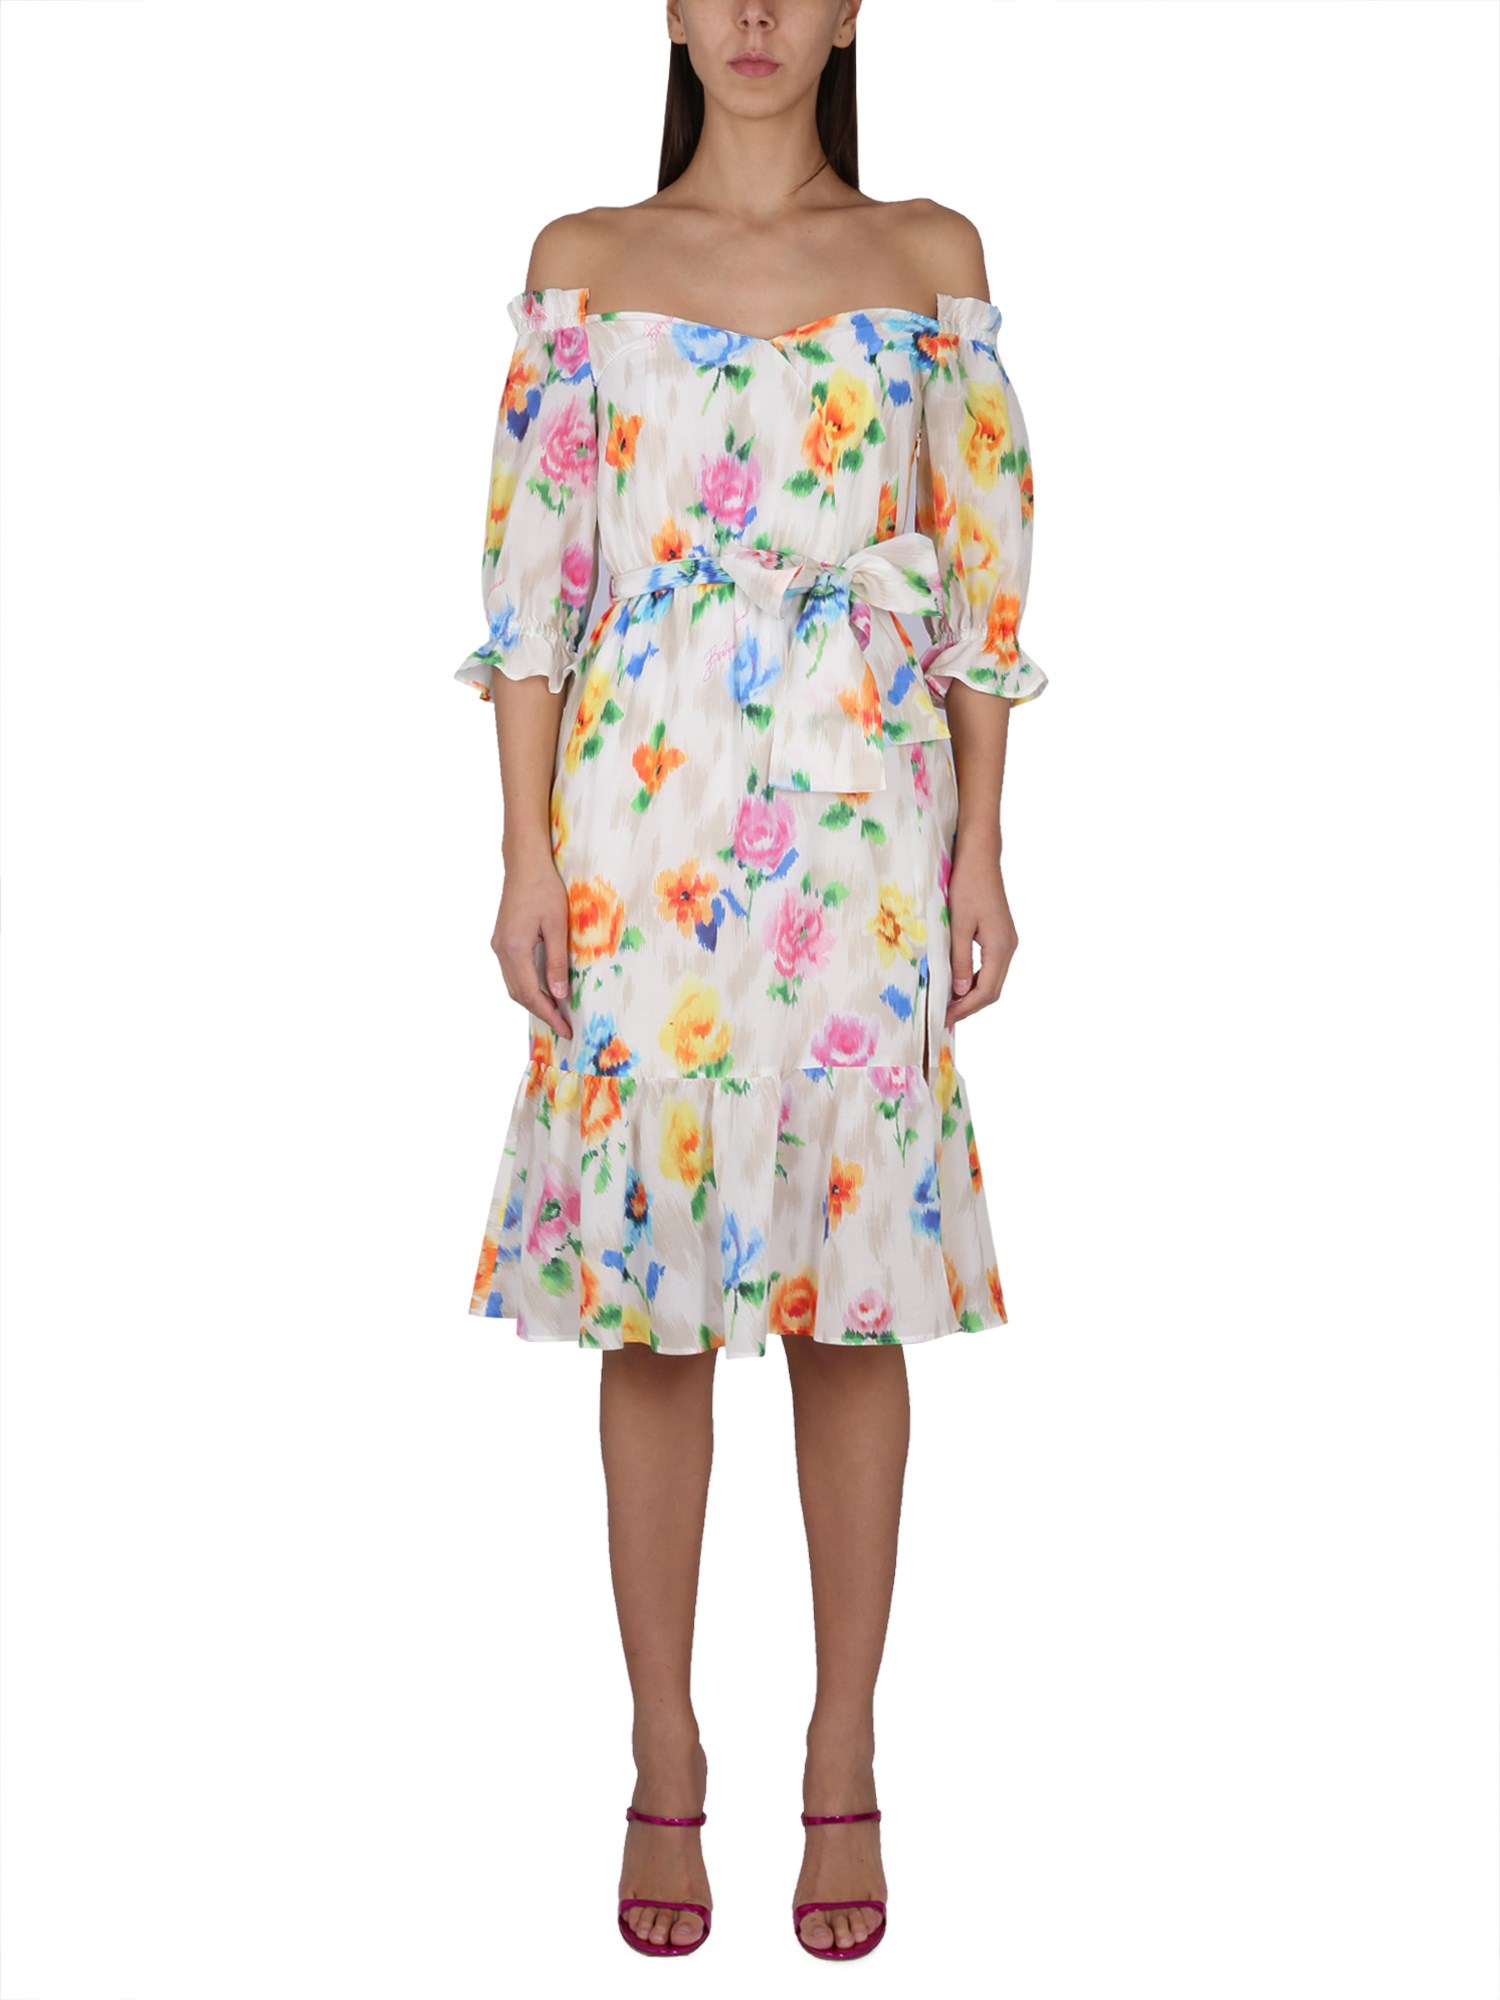 boutique moschino dress with floral pattern